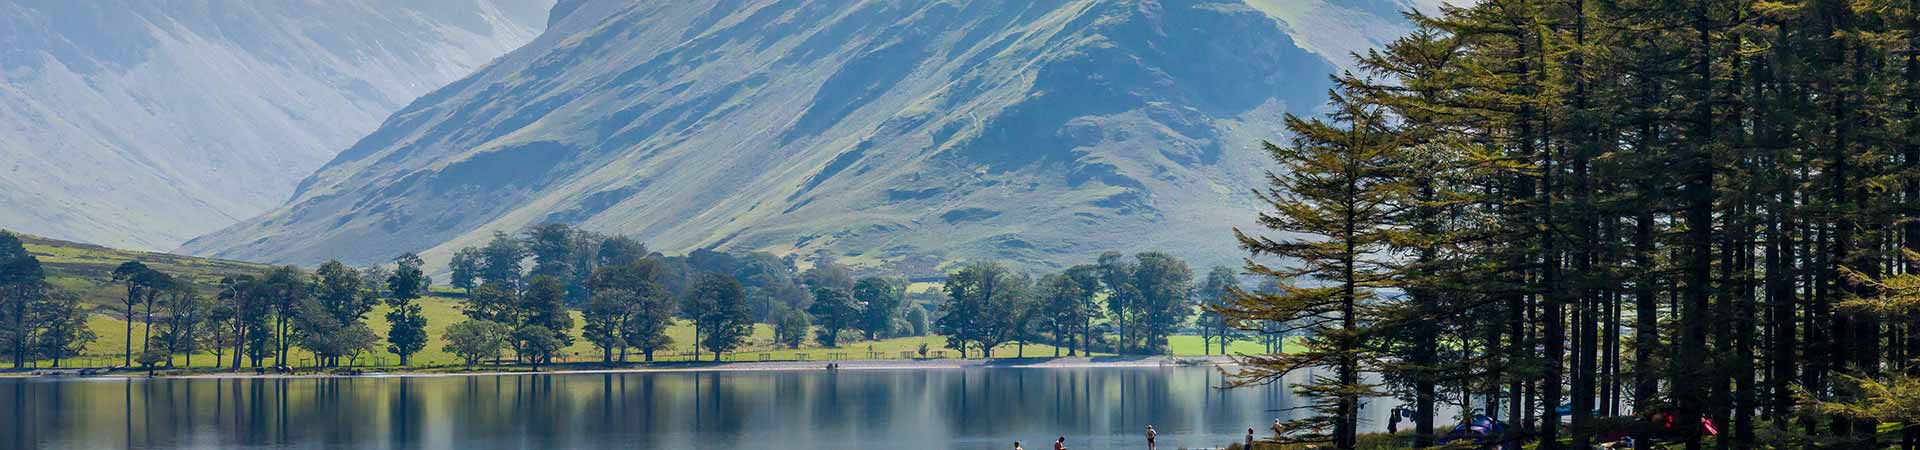 Holiday cottages in Cumbria